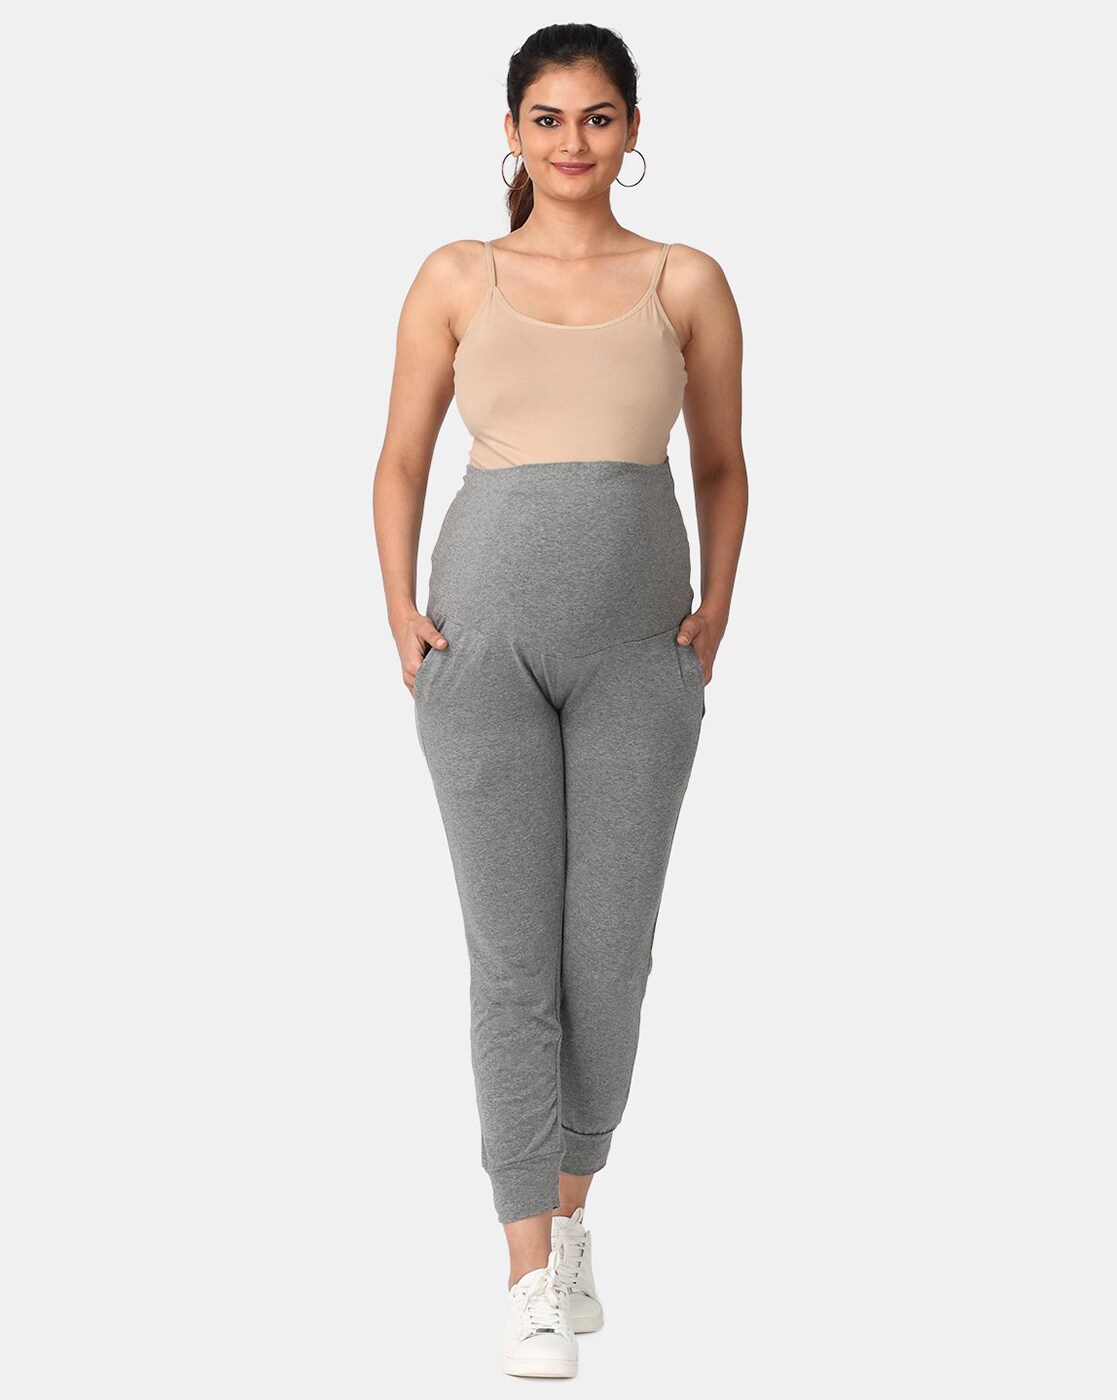 Pregnancy Pants Bottom Wear and Maternity Leggings and Trouser Online